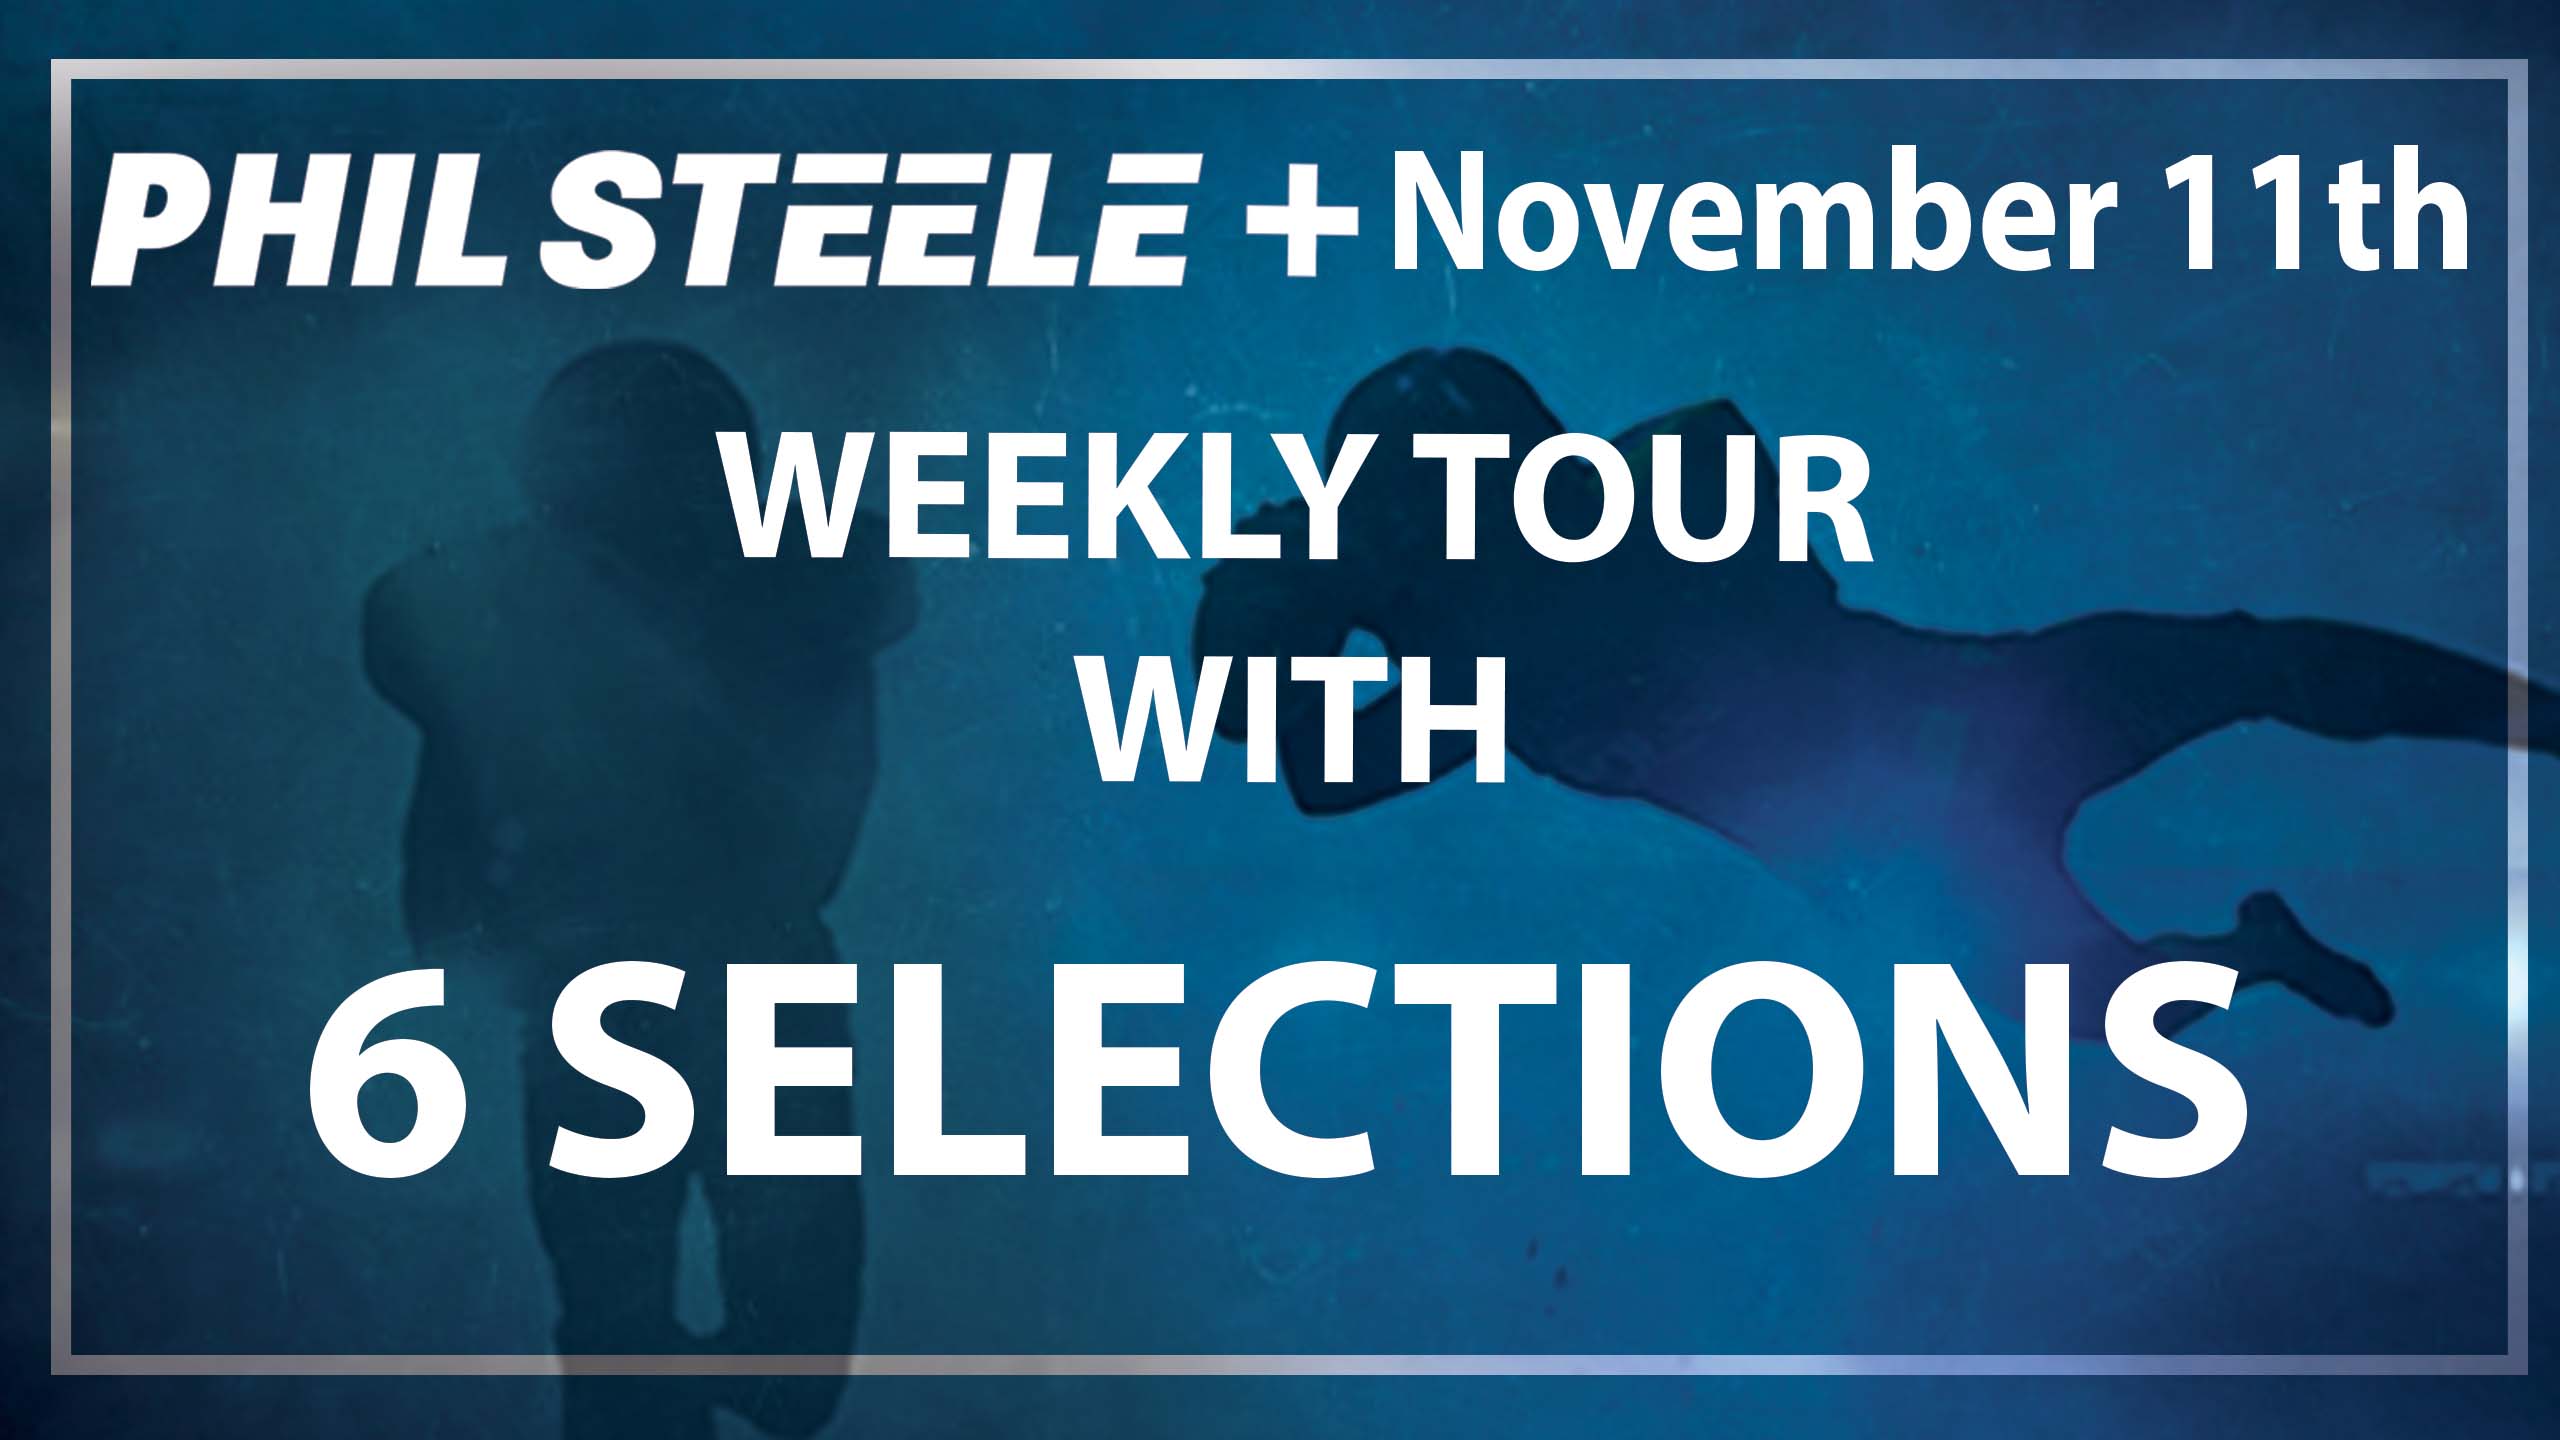 Phil Steele Plus Tour for Nov 11th with 6 Selections. Phil Steele